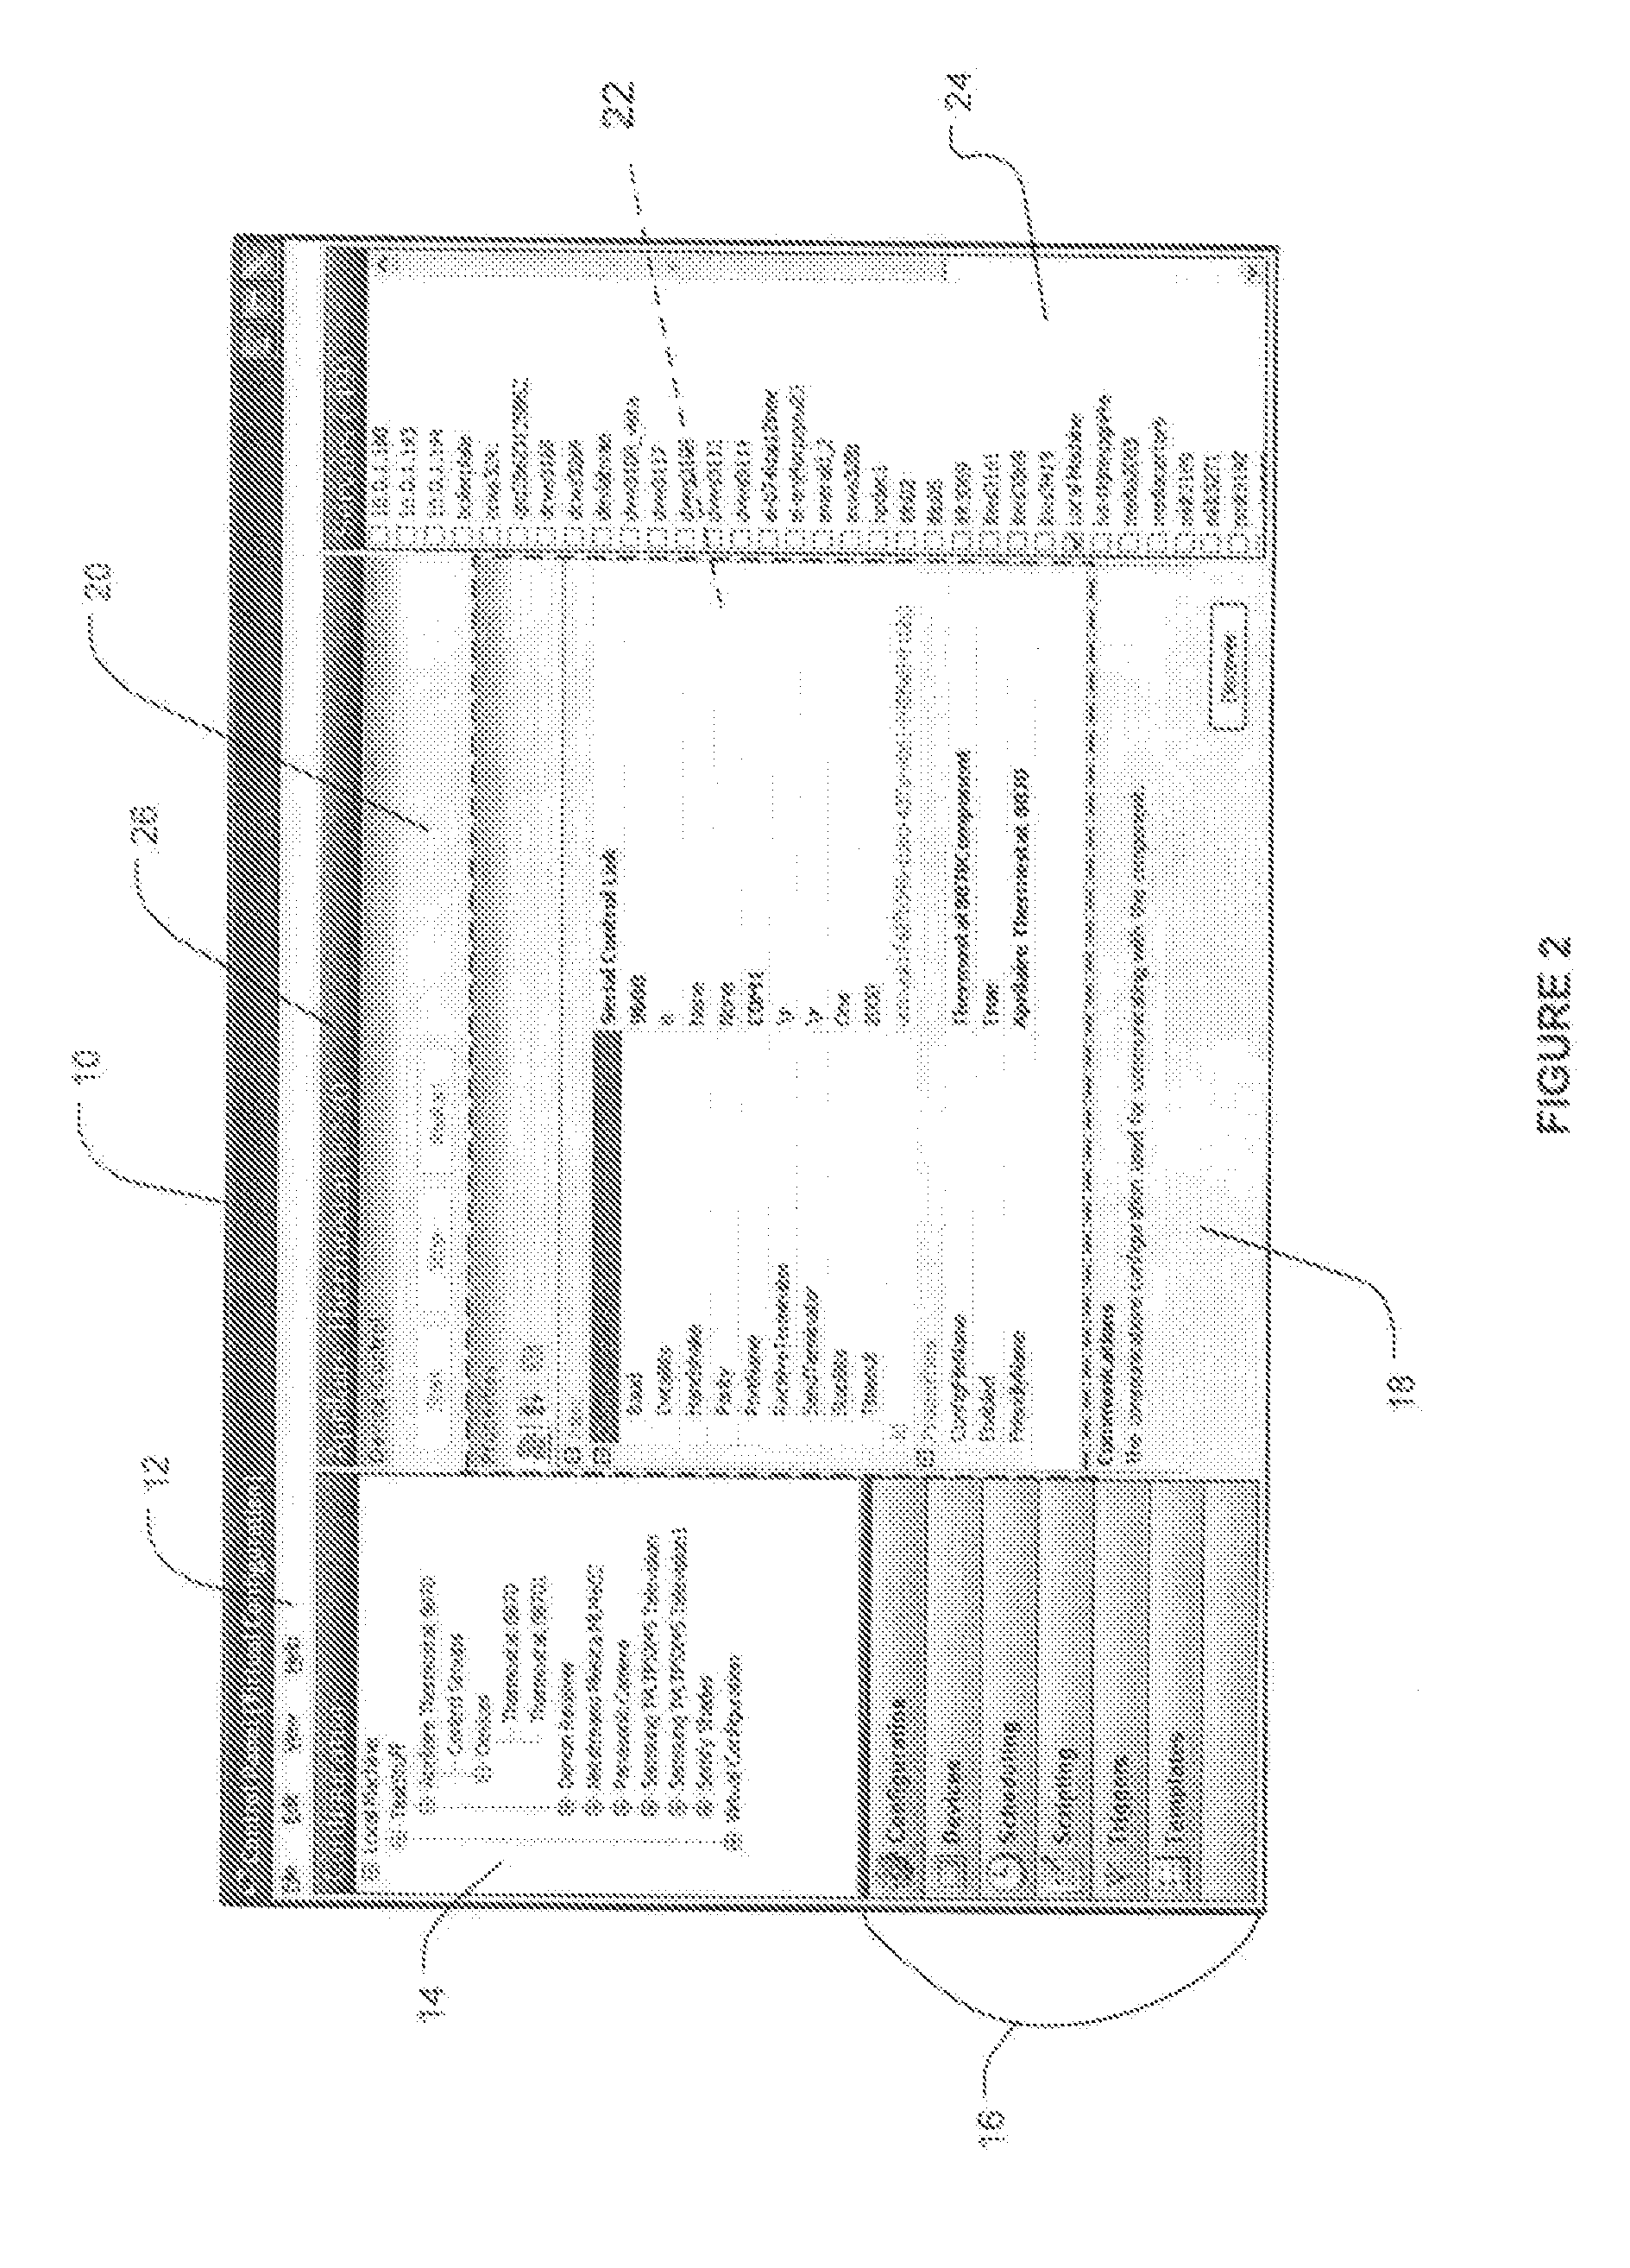 User control interface for convergence and automation system